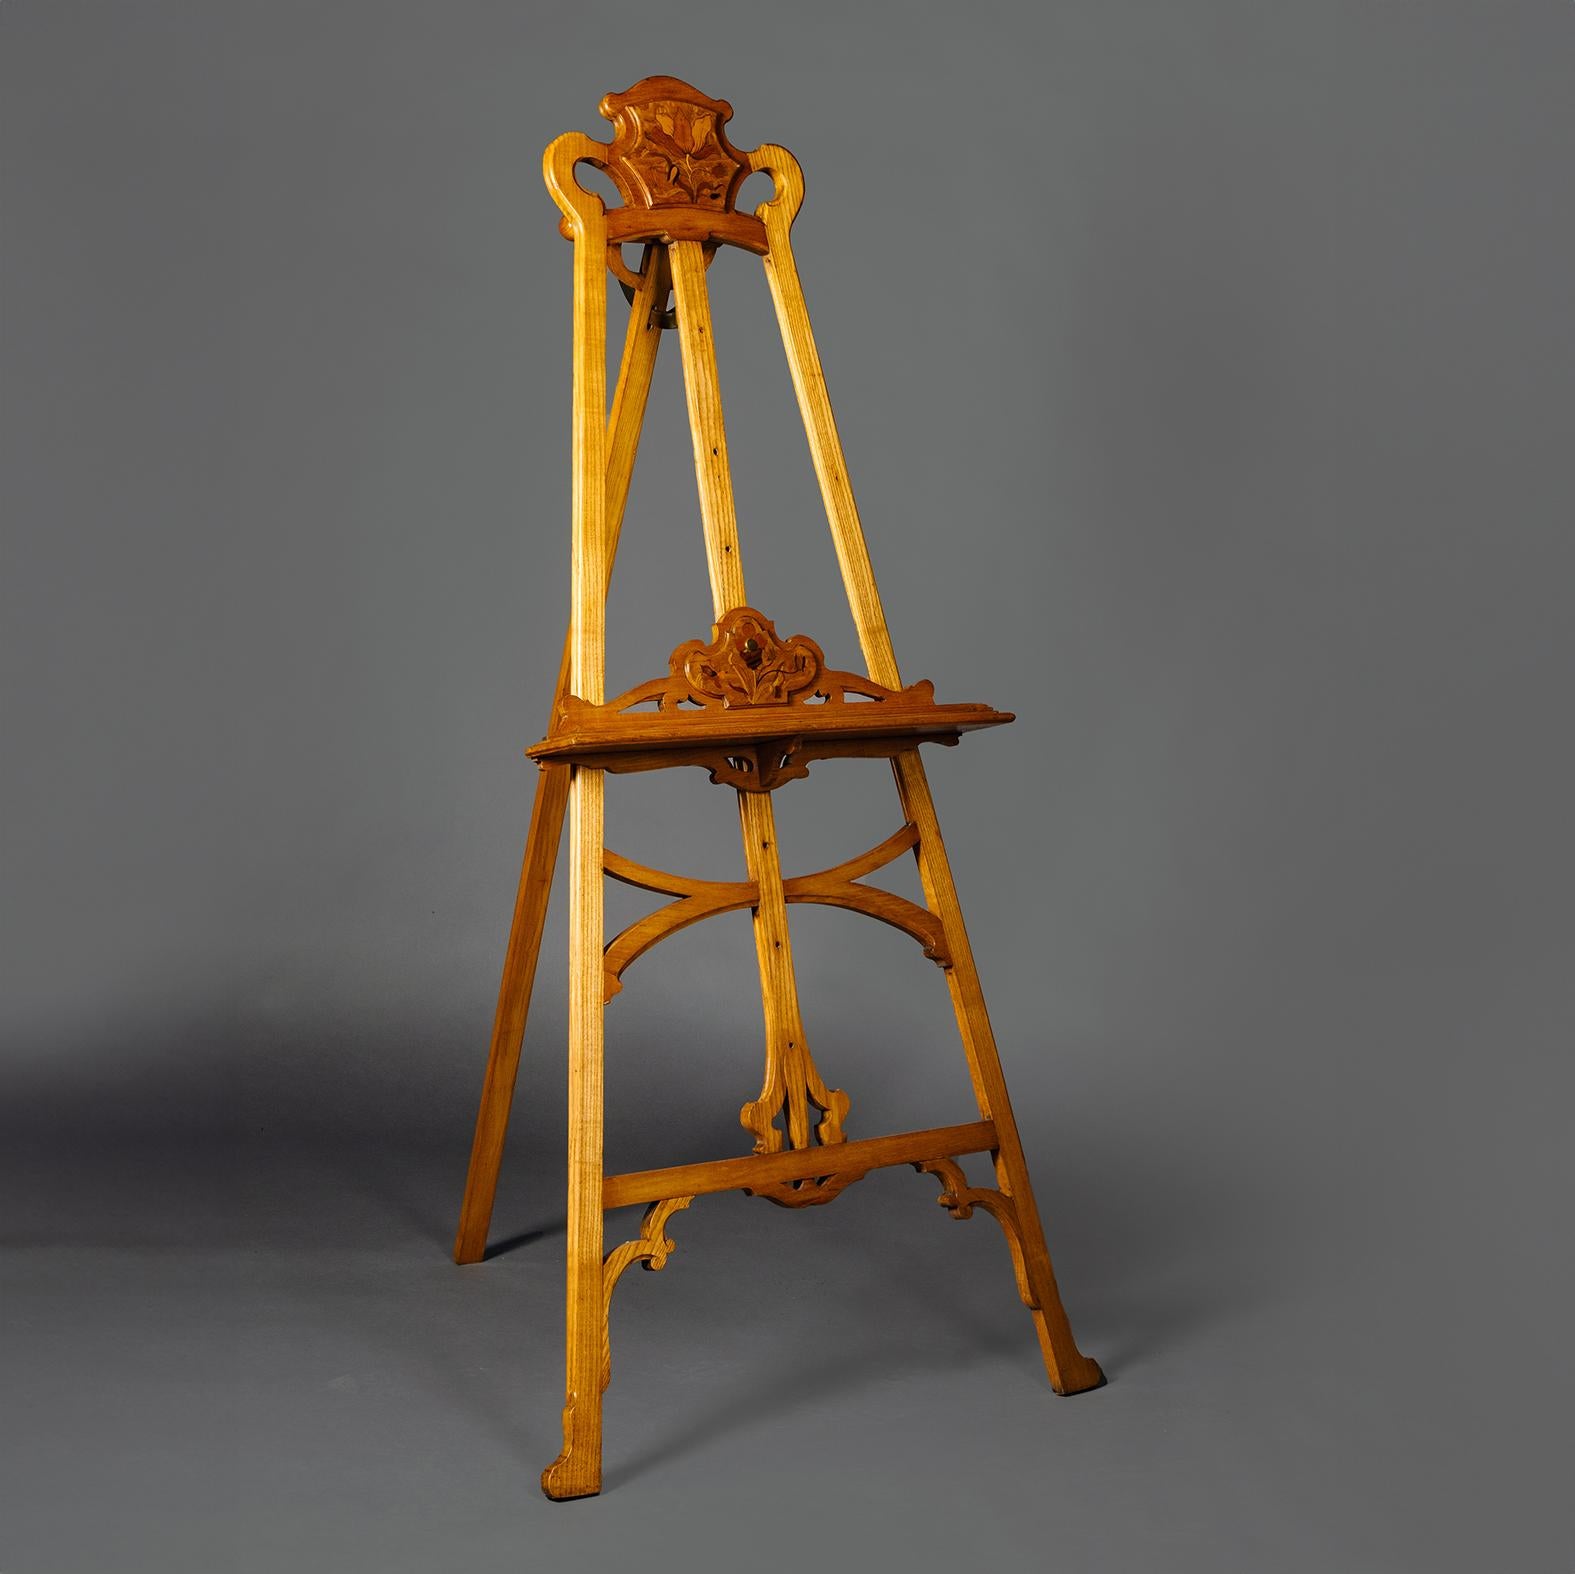 An Art Nouveau Ash and Marquetry Easel. 

The shaped cresting with marquetry panel of coloured woods depicting a Lilly flower, above a splayed latticework stand with an adjustable rack and support decorated with marquetry flowers.

This elegant